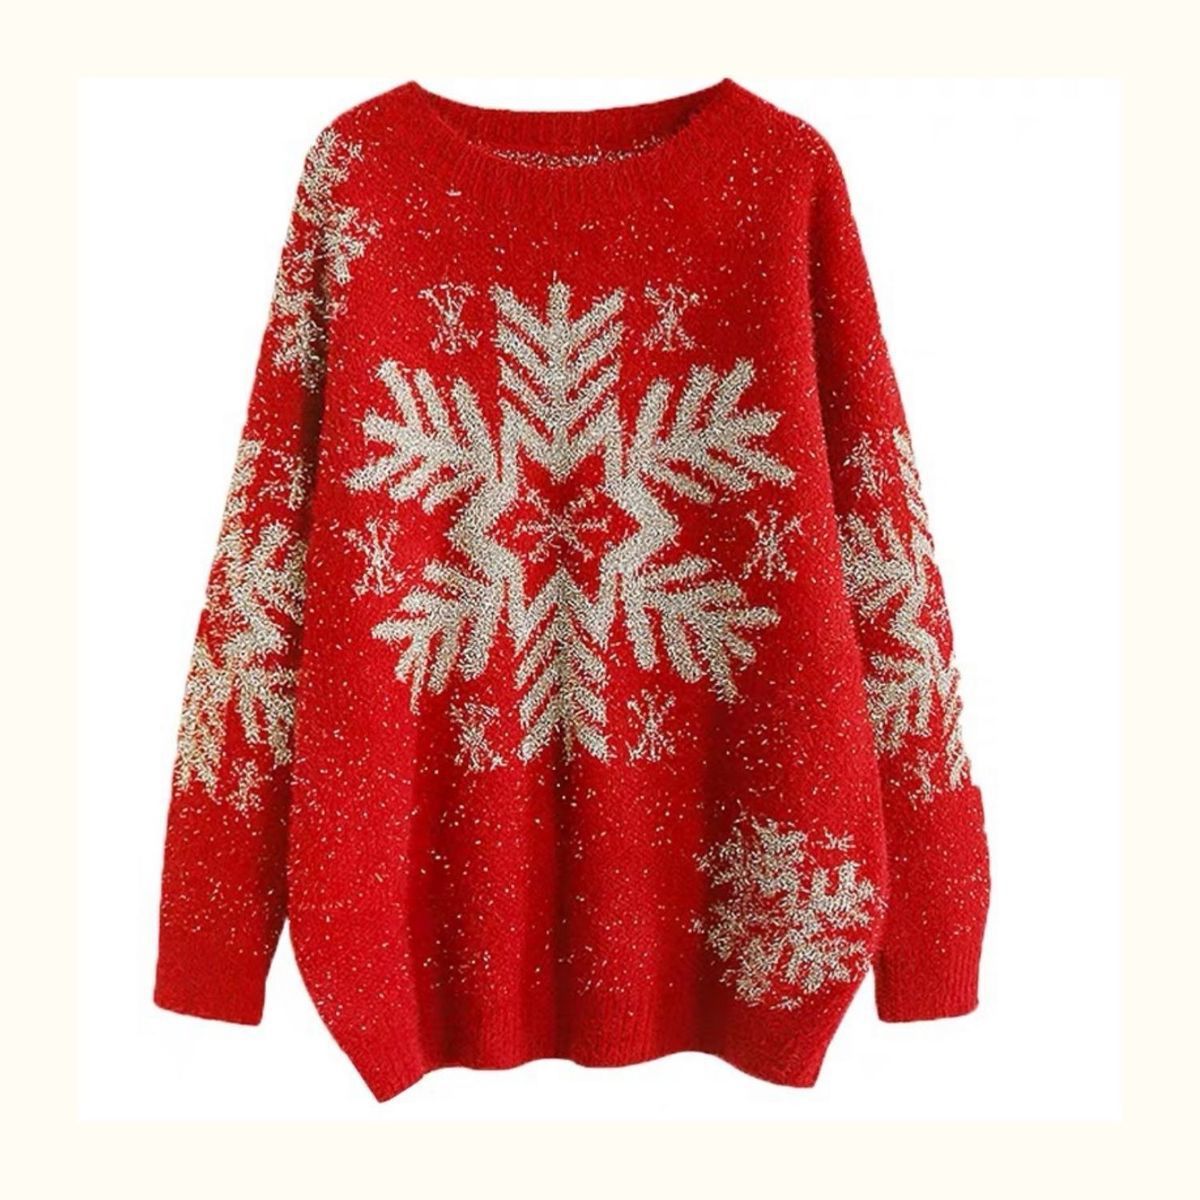 Christmas Snowflake Year's Red Sweater Sweater Women's Thick Loose Jumper Medium Long Top